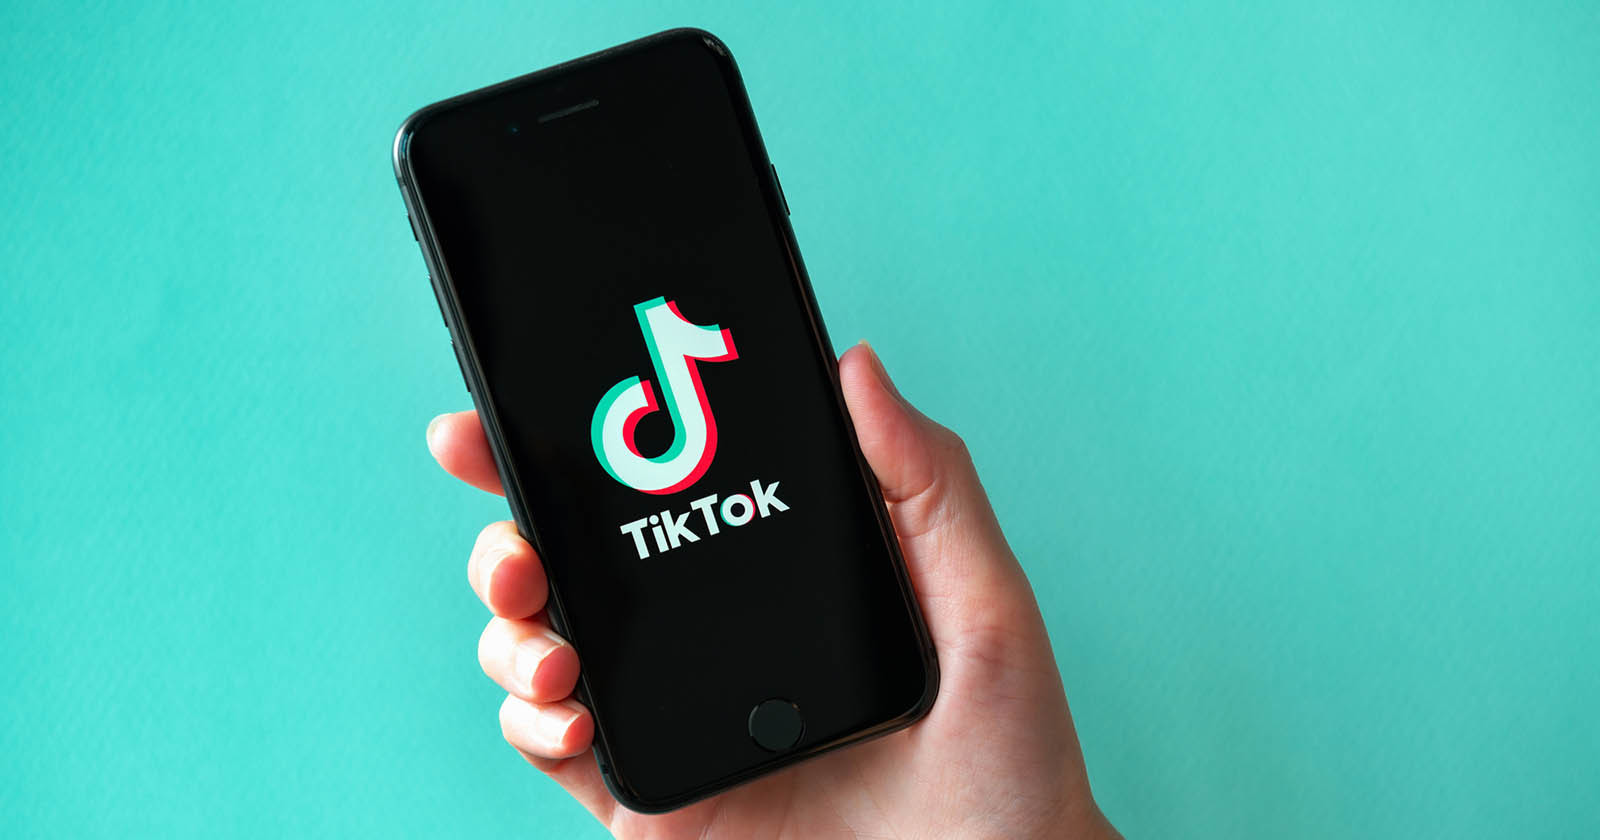  tiktok denies breach after hacking group claims have 